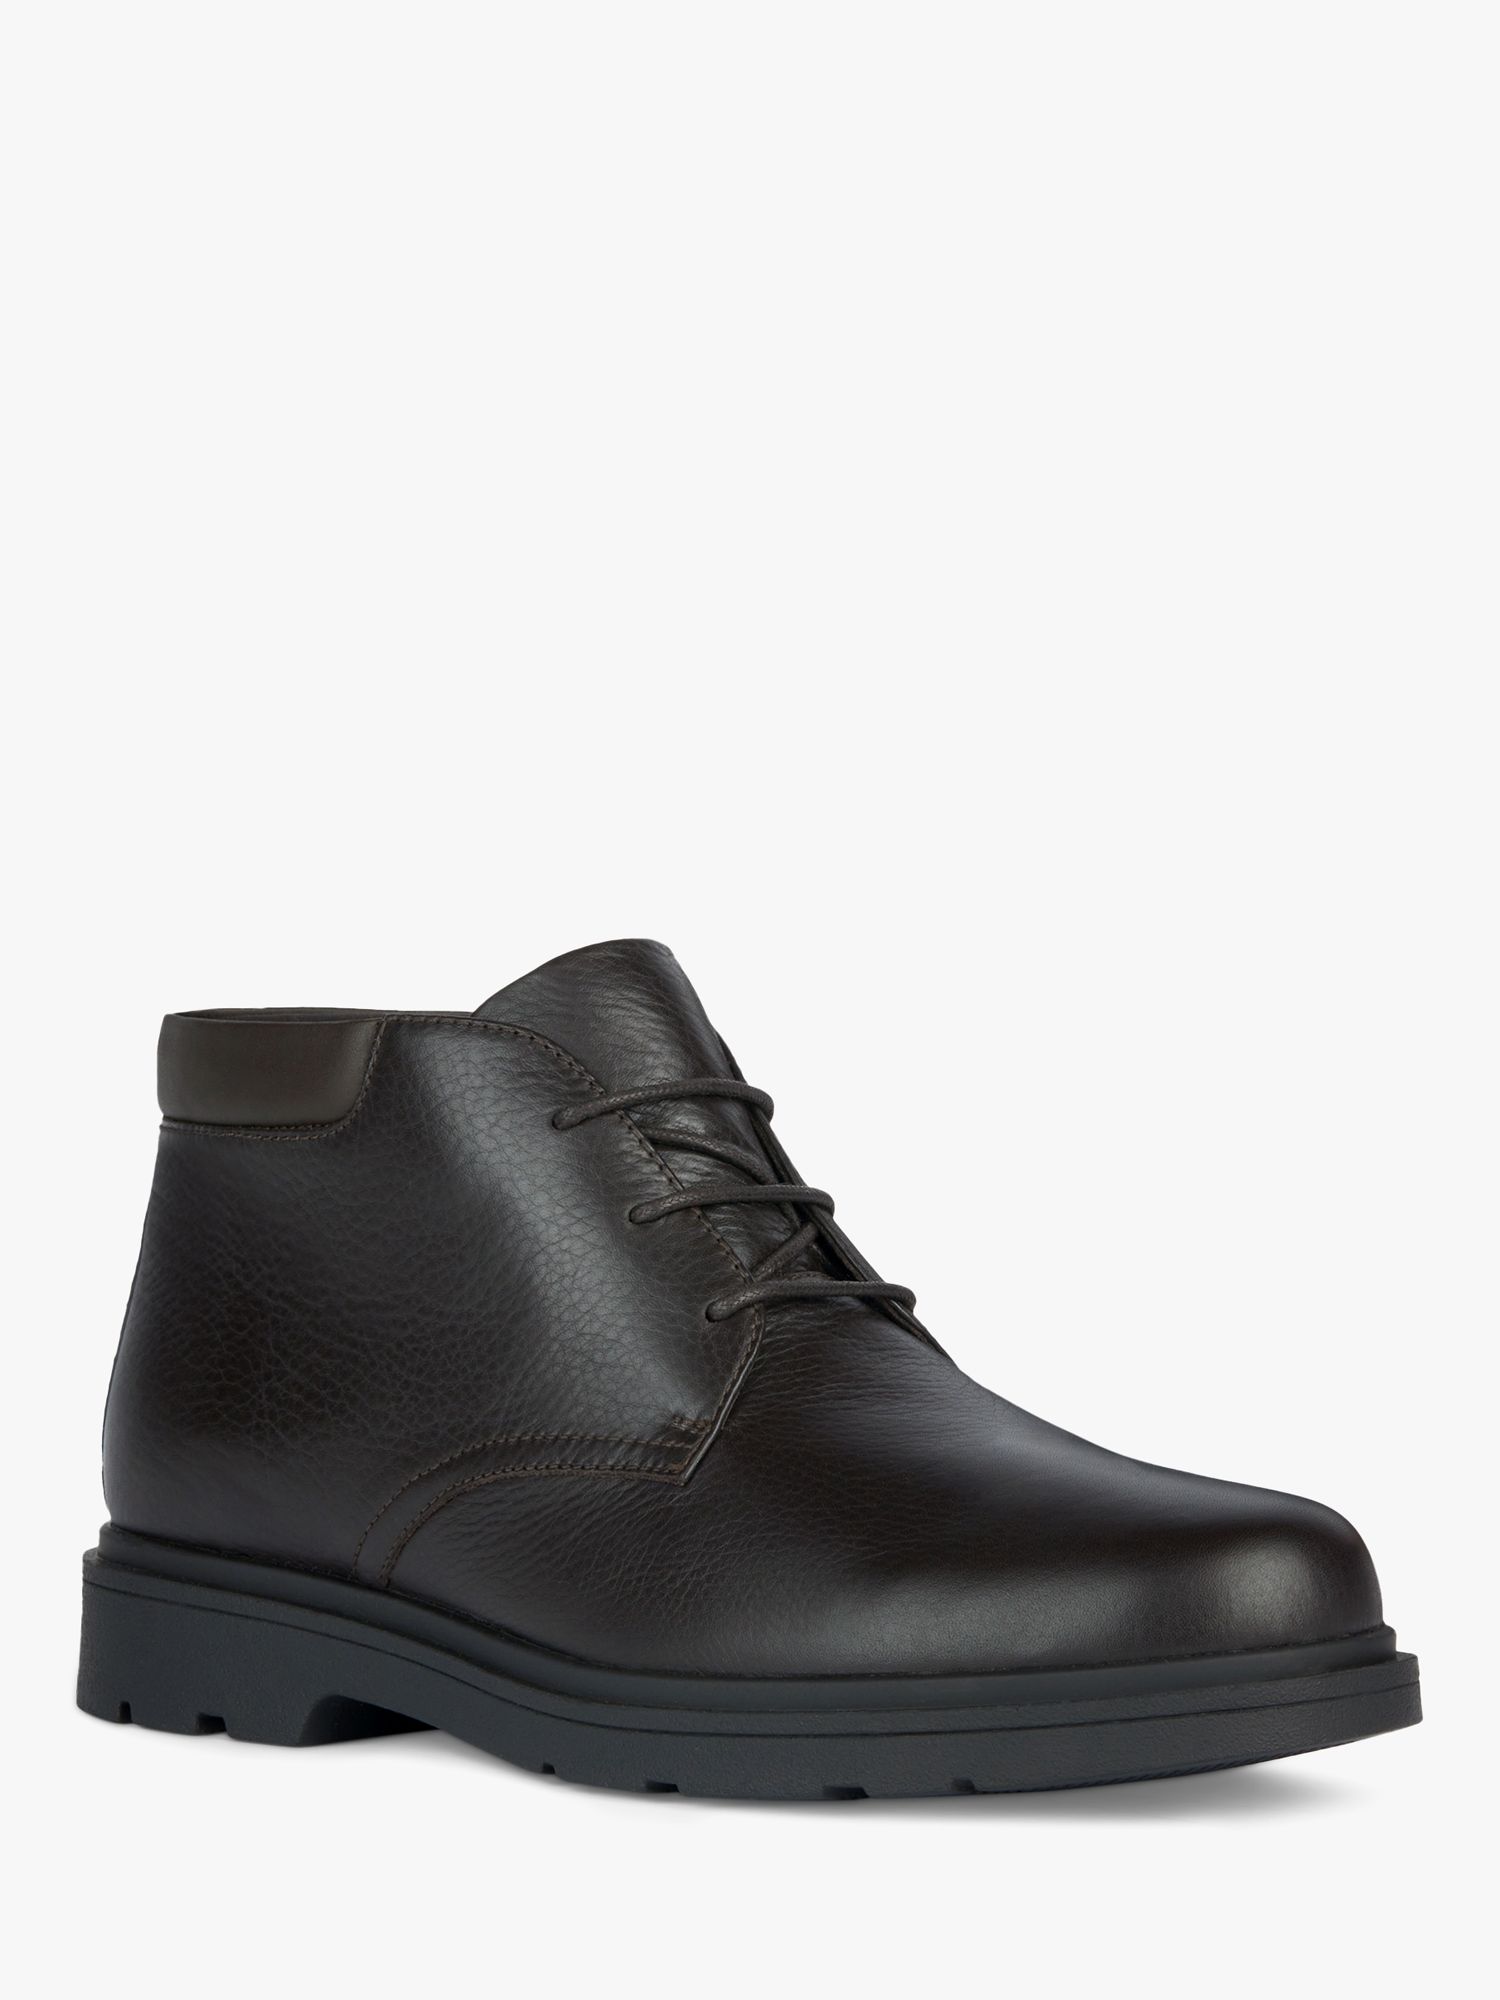 Geox Wide Fit Spherica EC1 Leather Ankle Boots, Coffee at John Lewis ...